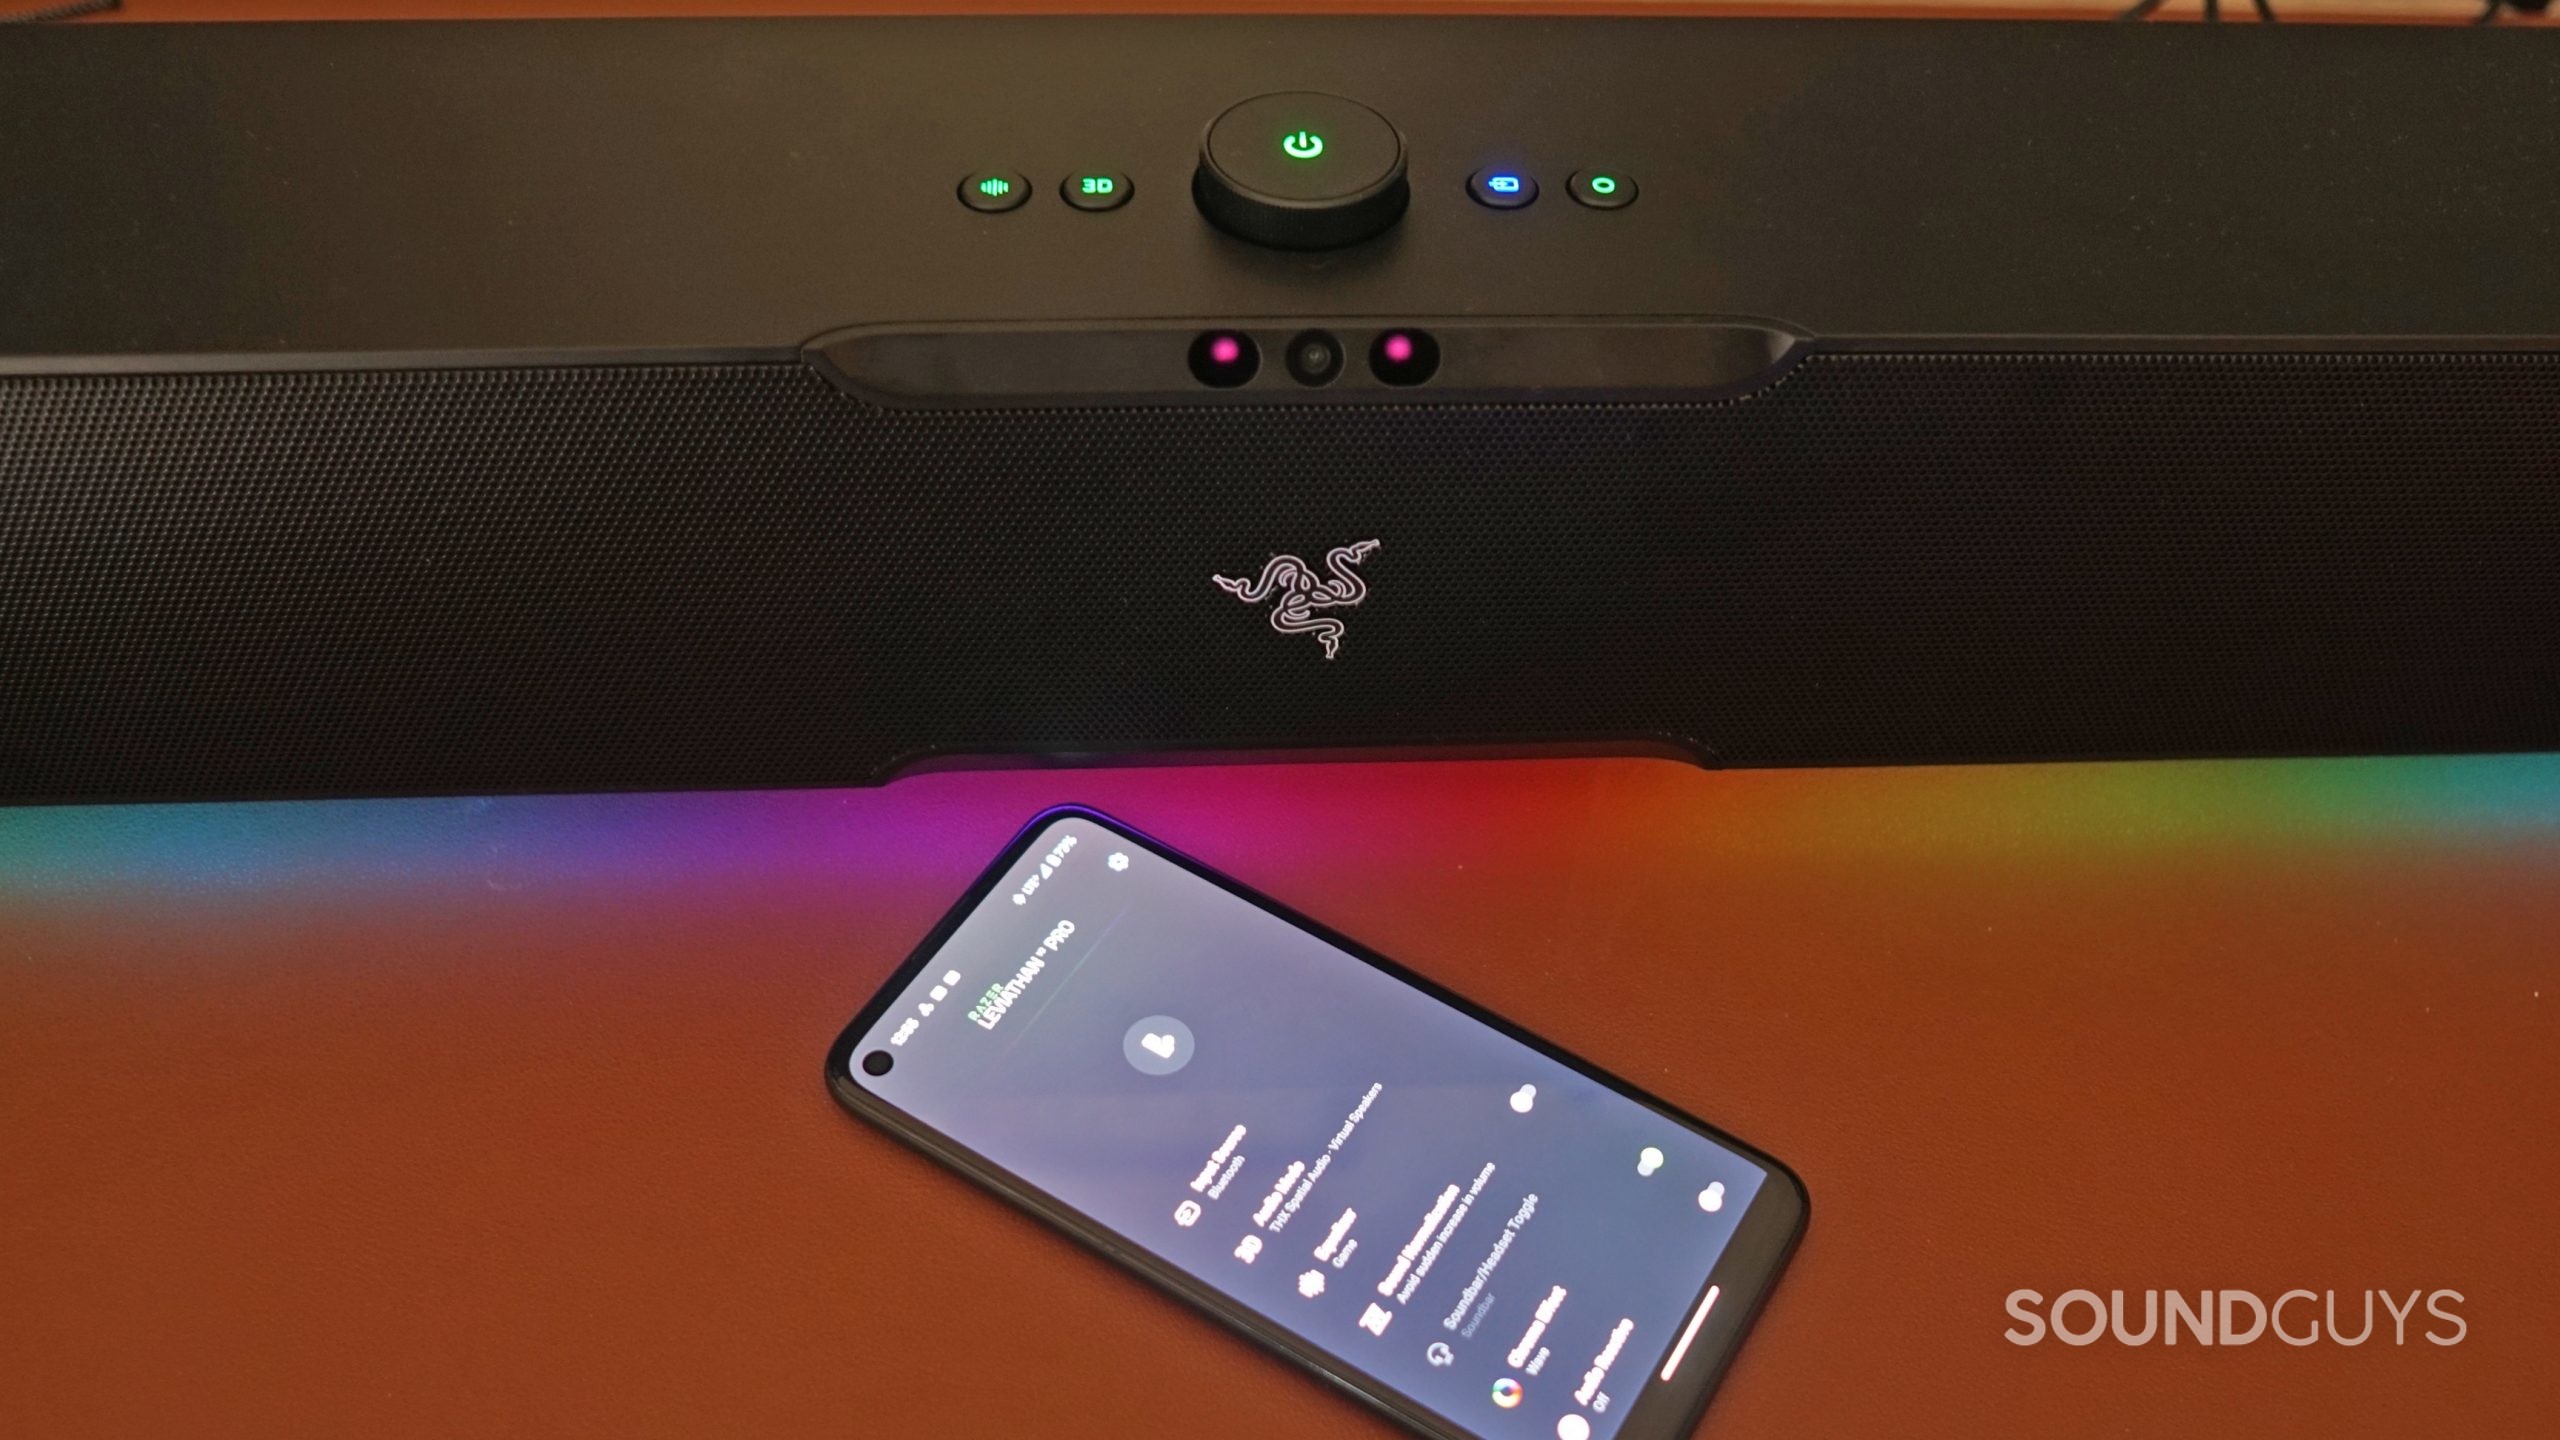 The Razer Leviathan V2 Pro sits on a leather surface, next to a Google Pixel 4a running the Razer Audio app.